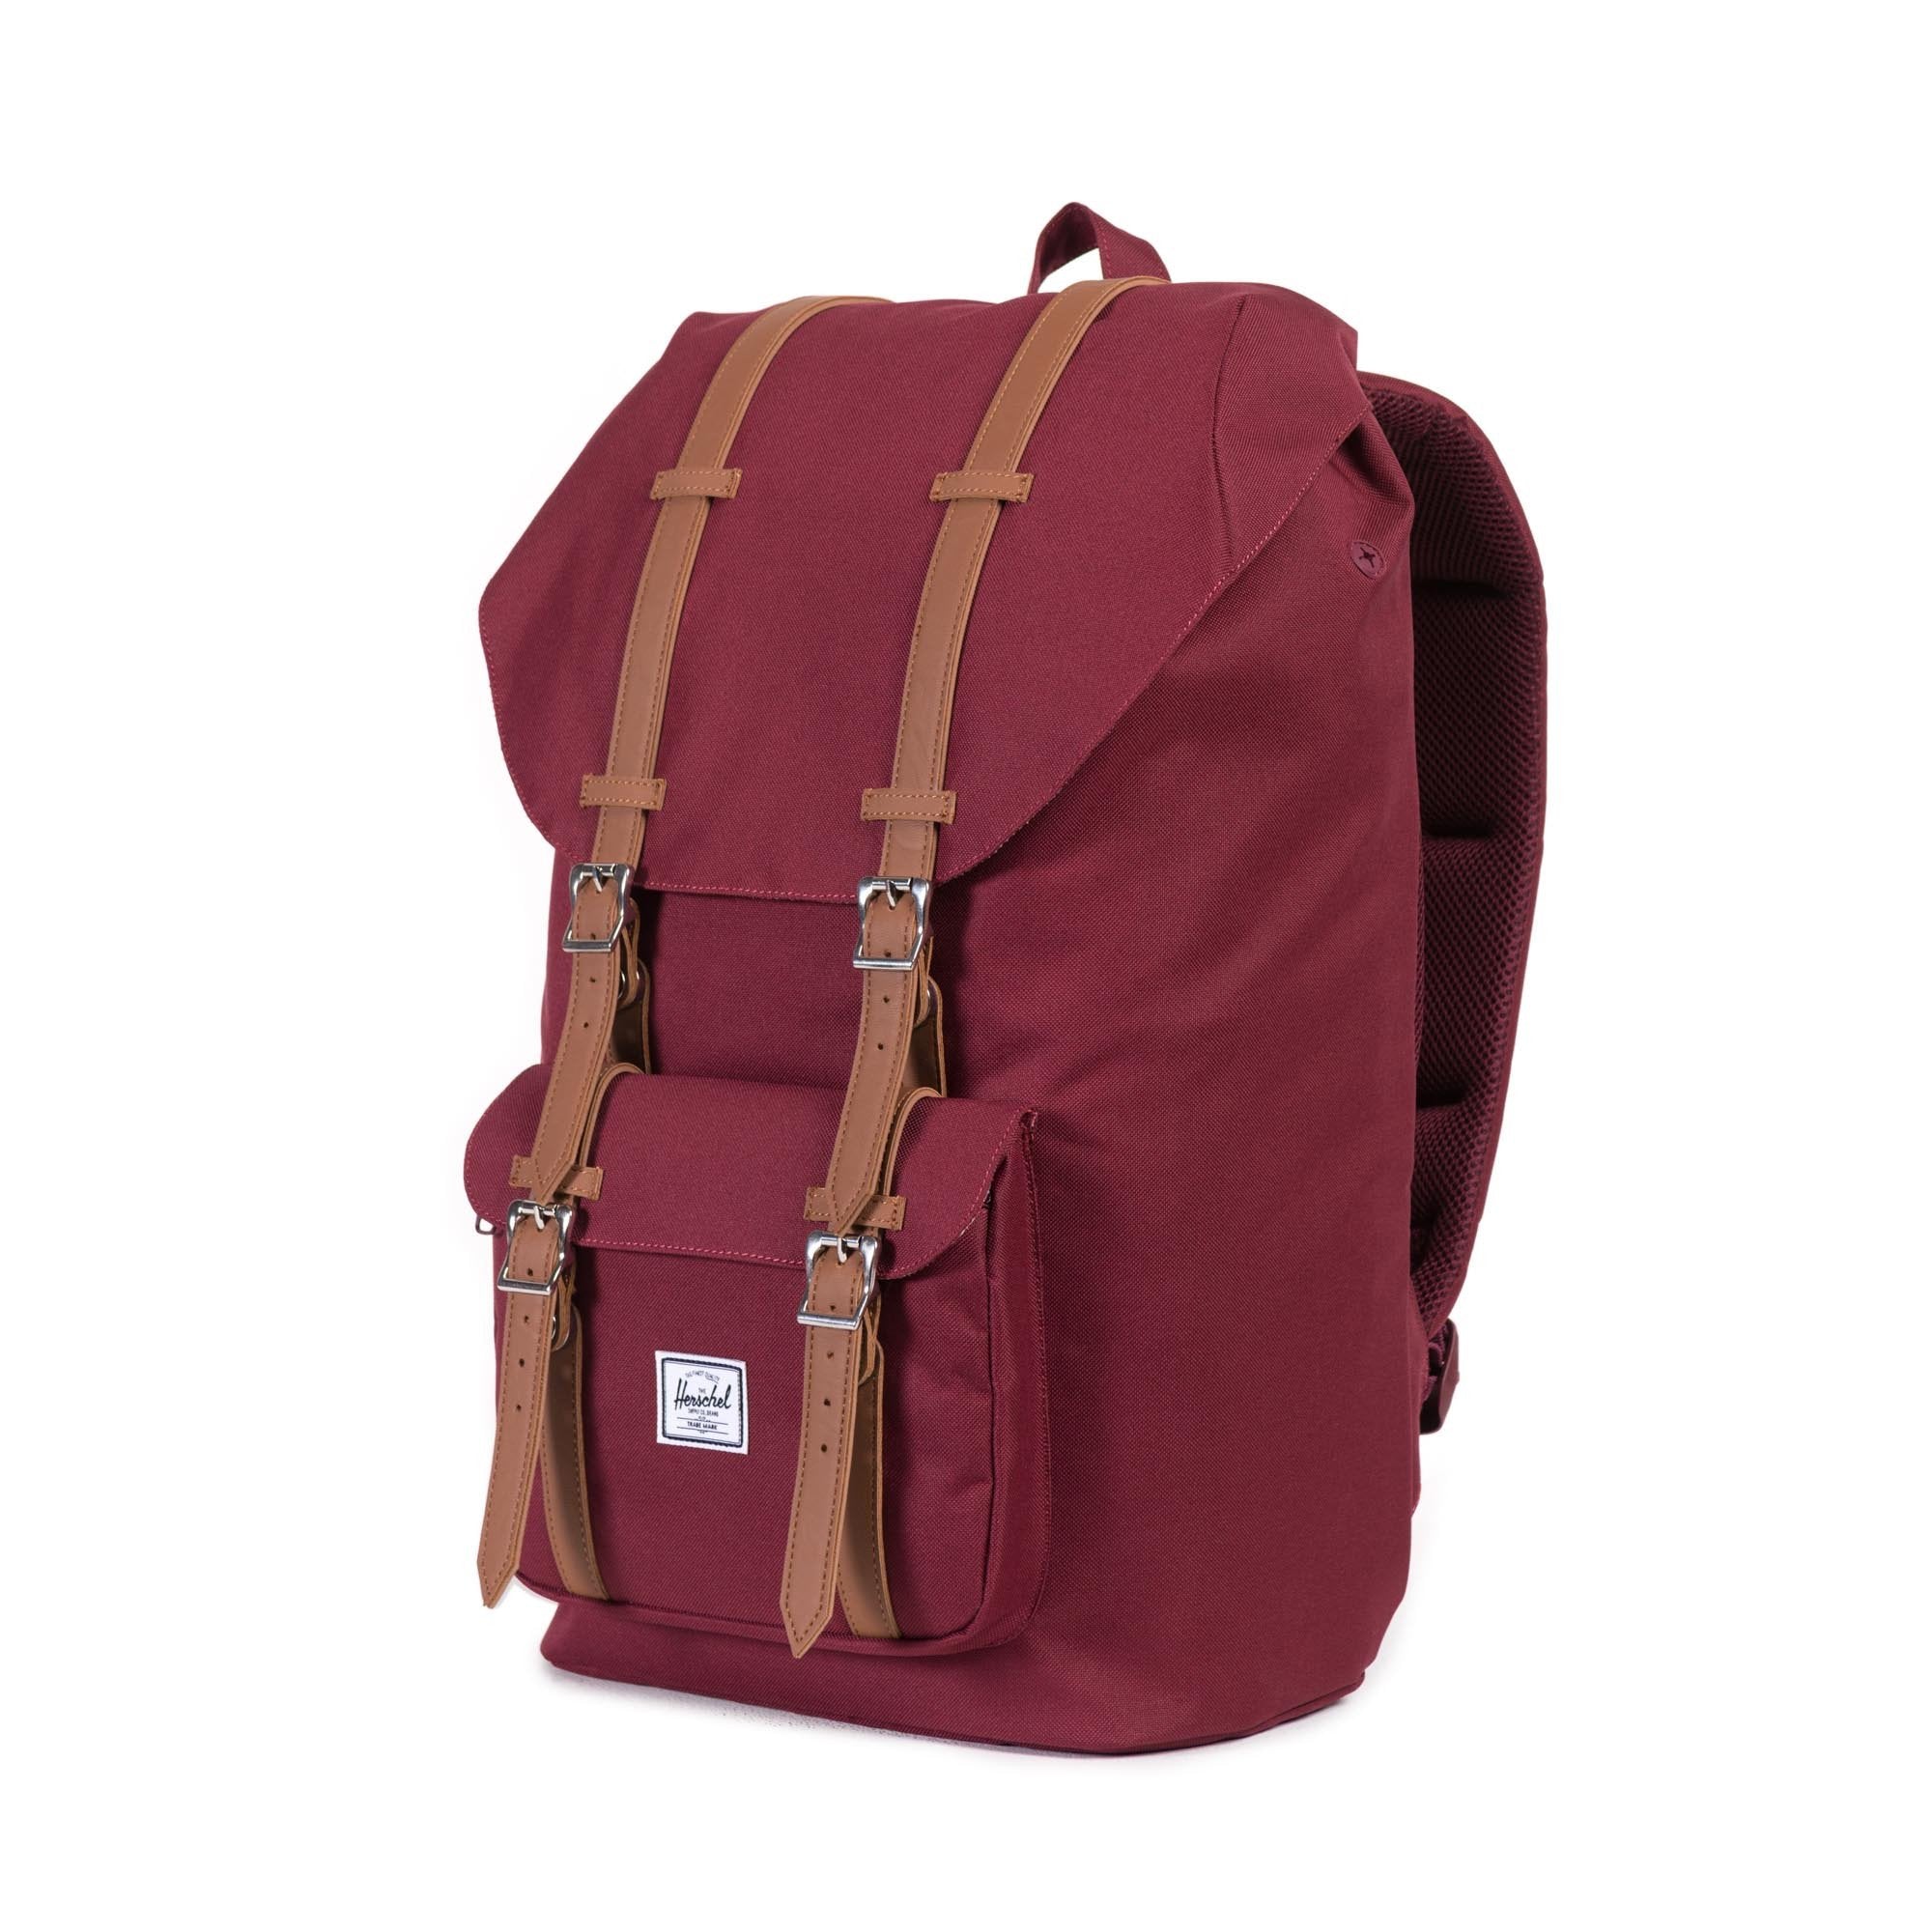 Little America Backpack - Windsor Wine/Tan Synthetic Leather – Feature